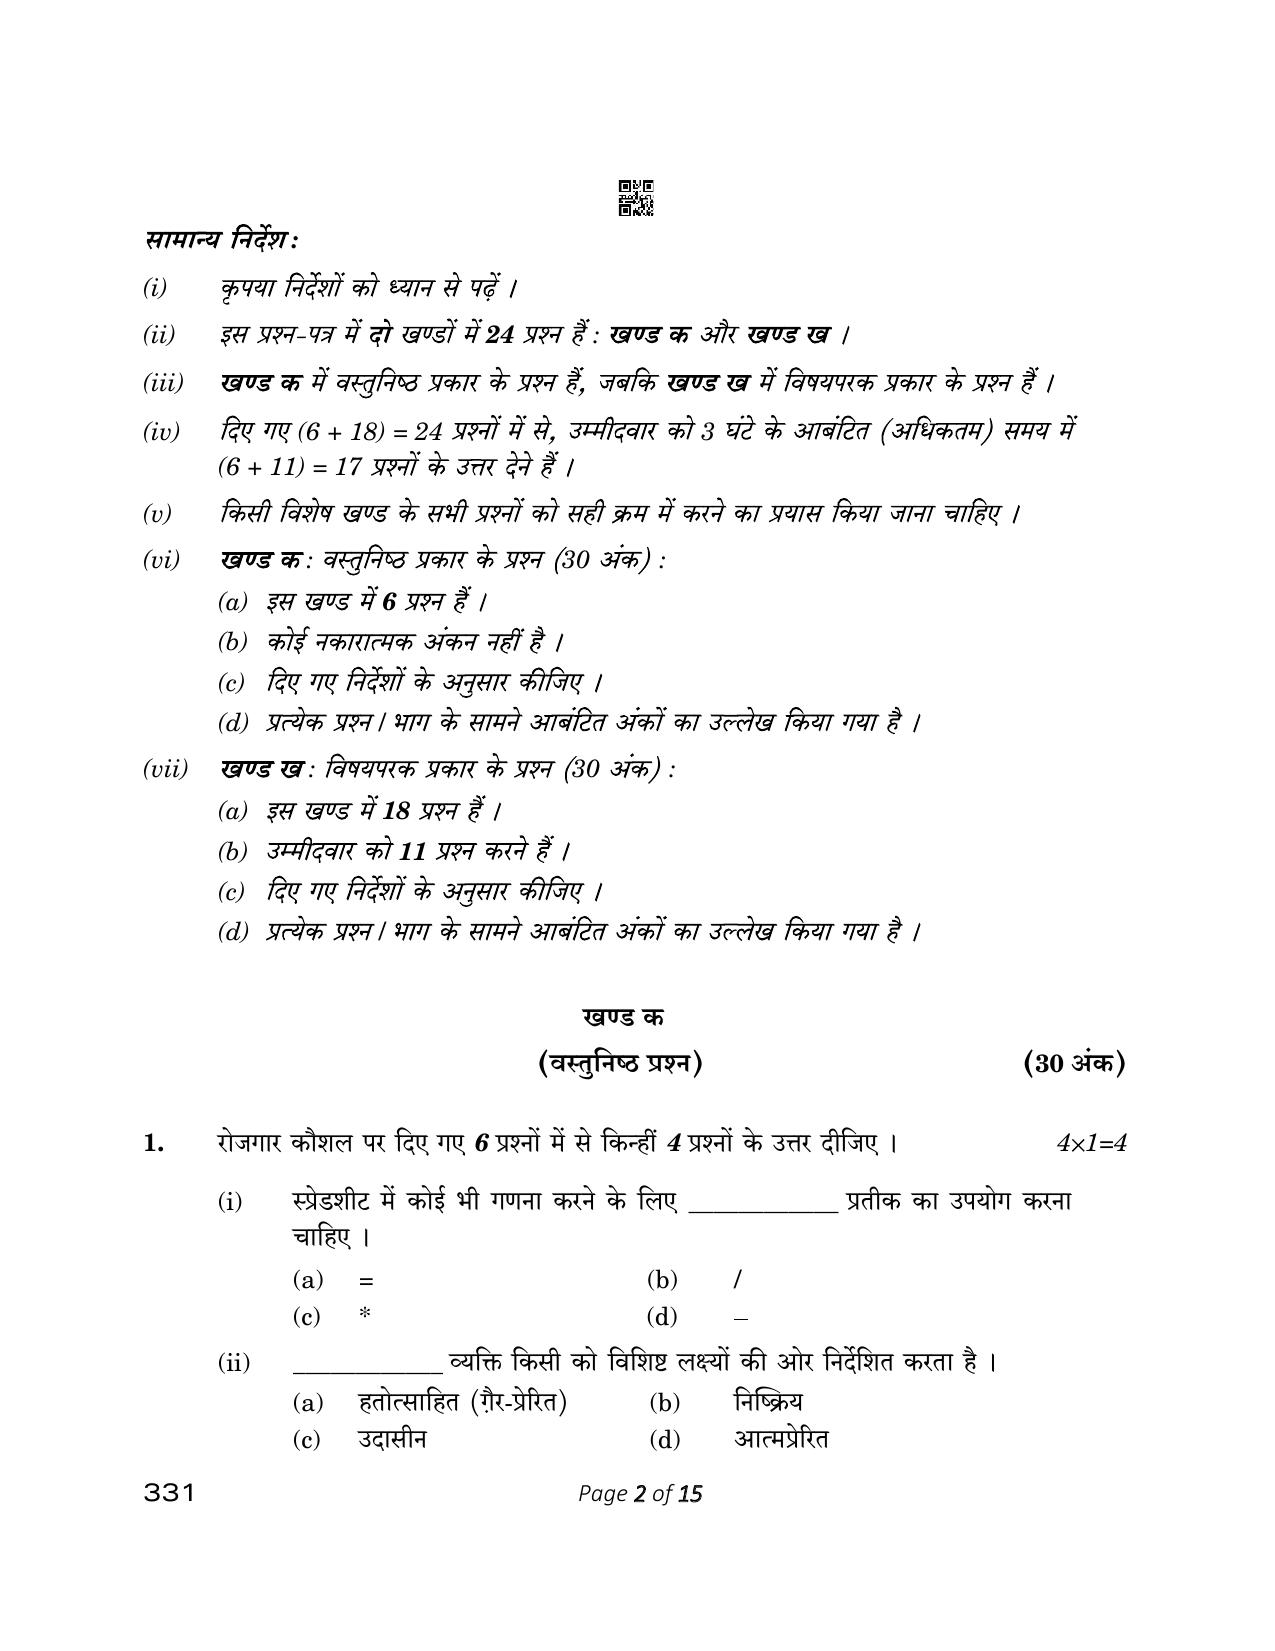 CBSE Class 12 331 Beauty And Wellness 2023 Question Paper - Page 2